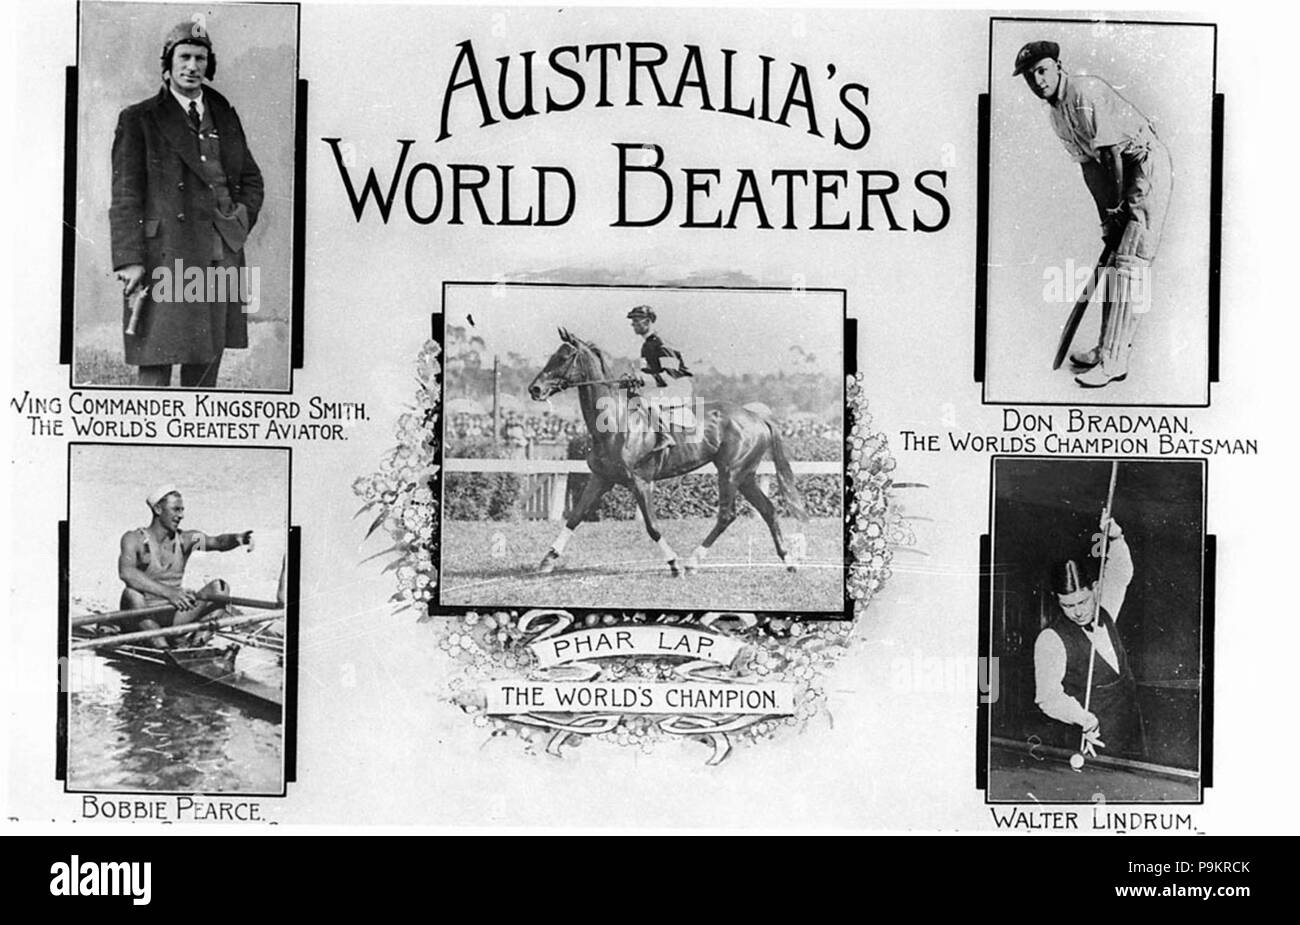 295 SLNSW 8808 A montage Australians World Beaters Charles Kingford Smith Don Bradman Bobby Pearce Walter Lindrum with Phar Lap as centre piece Stock Photo